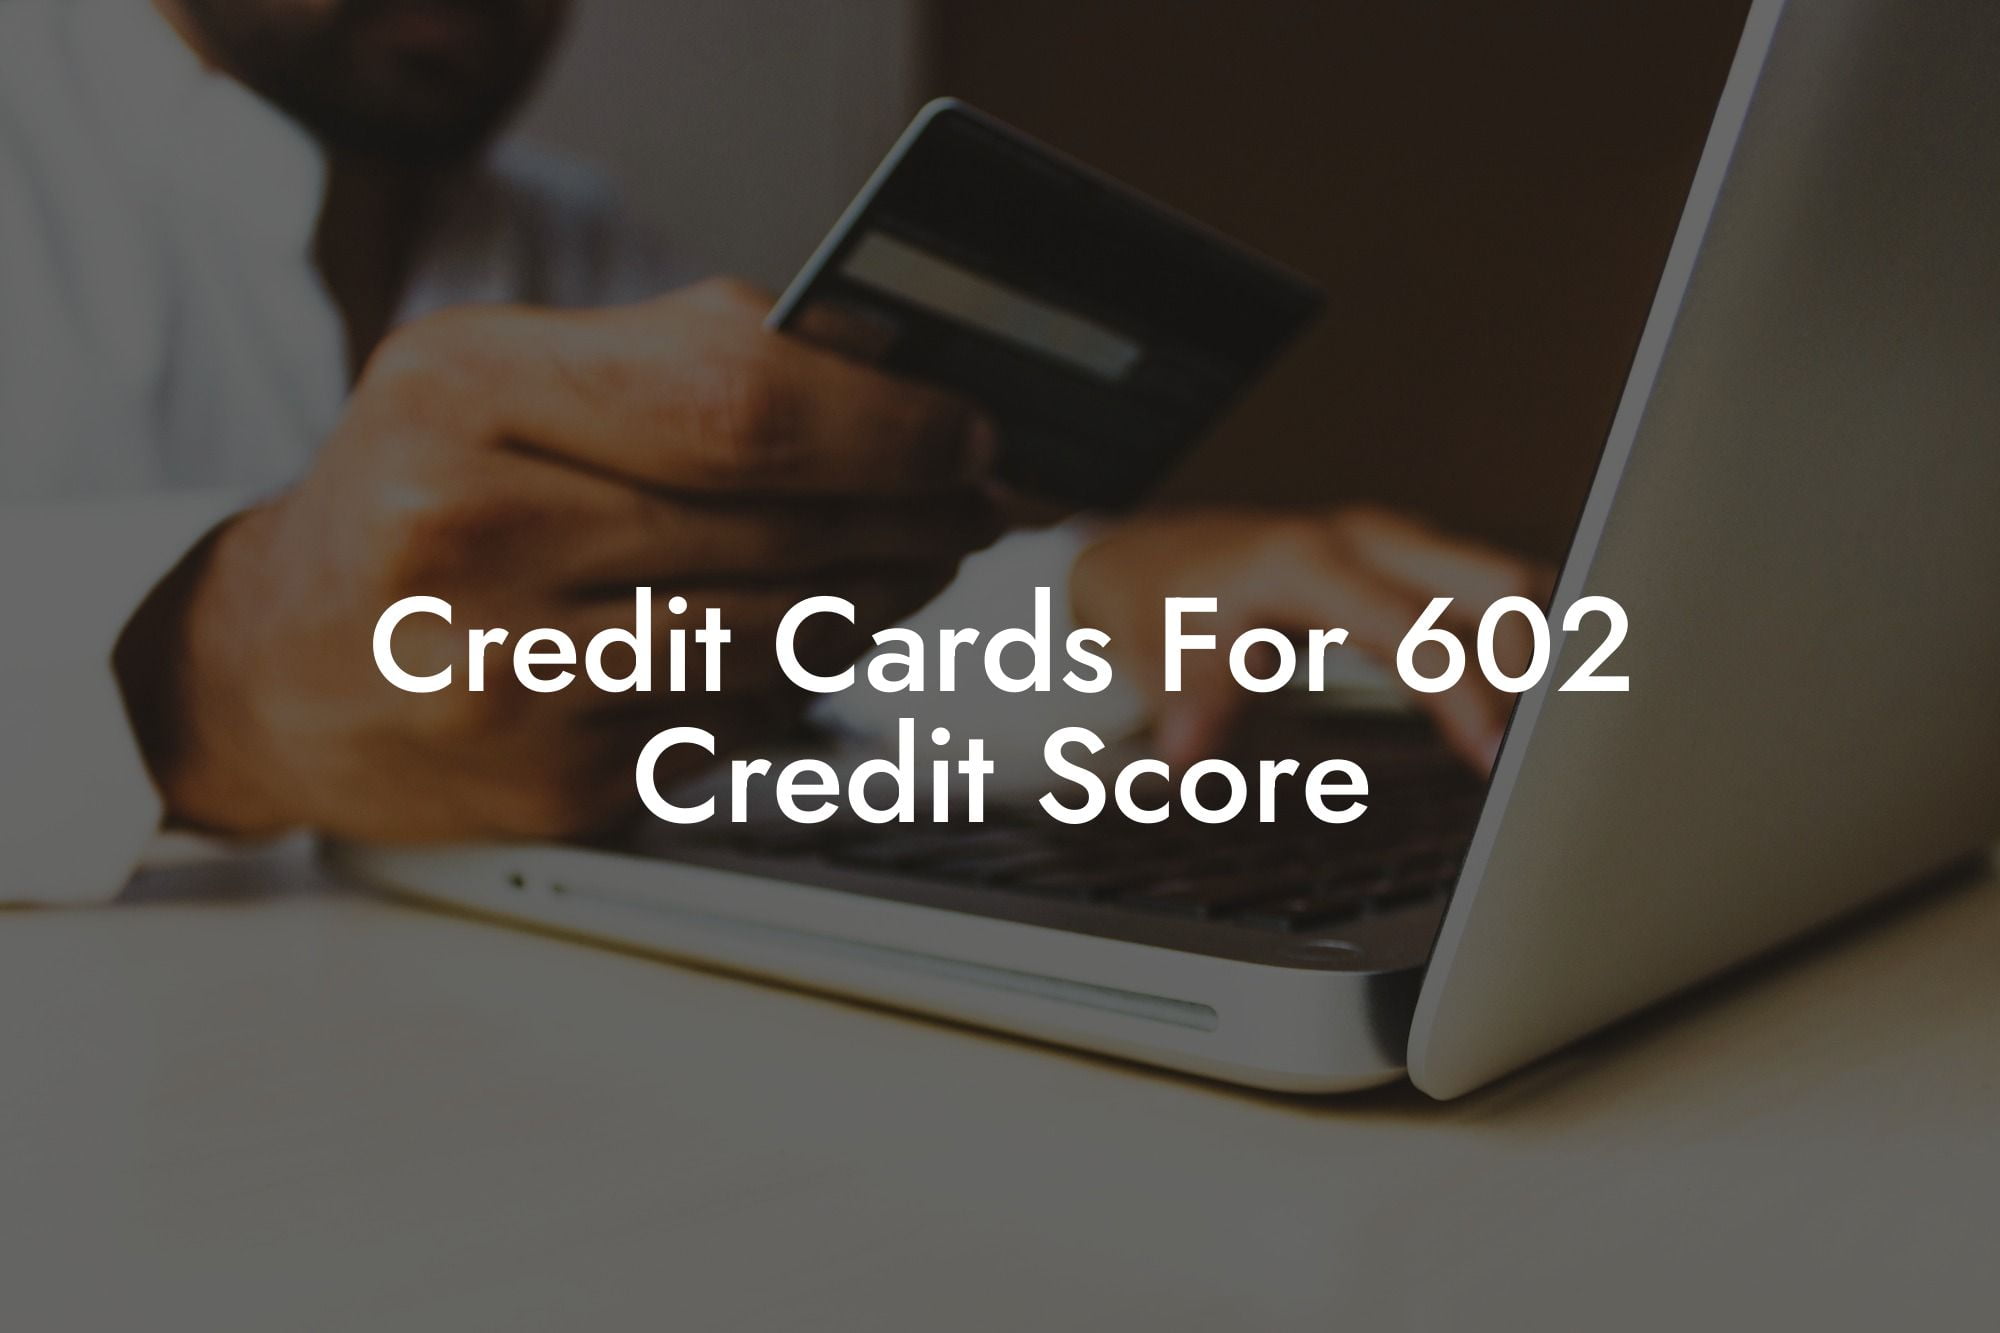 Credit Cards For 602 Credit Score